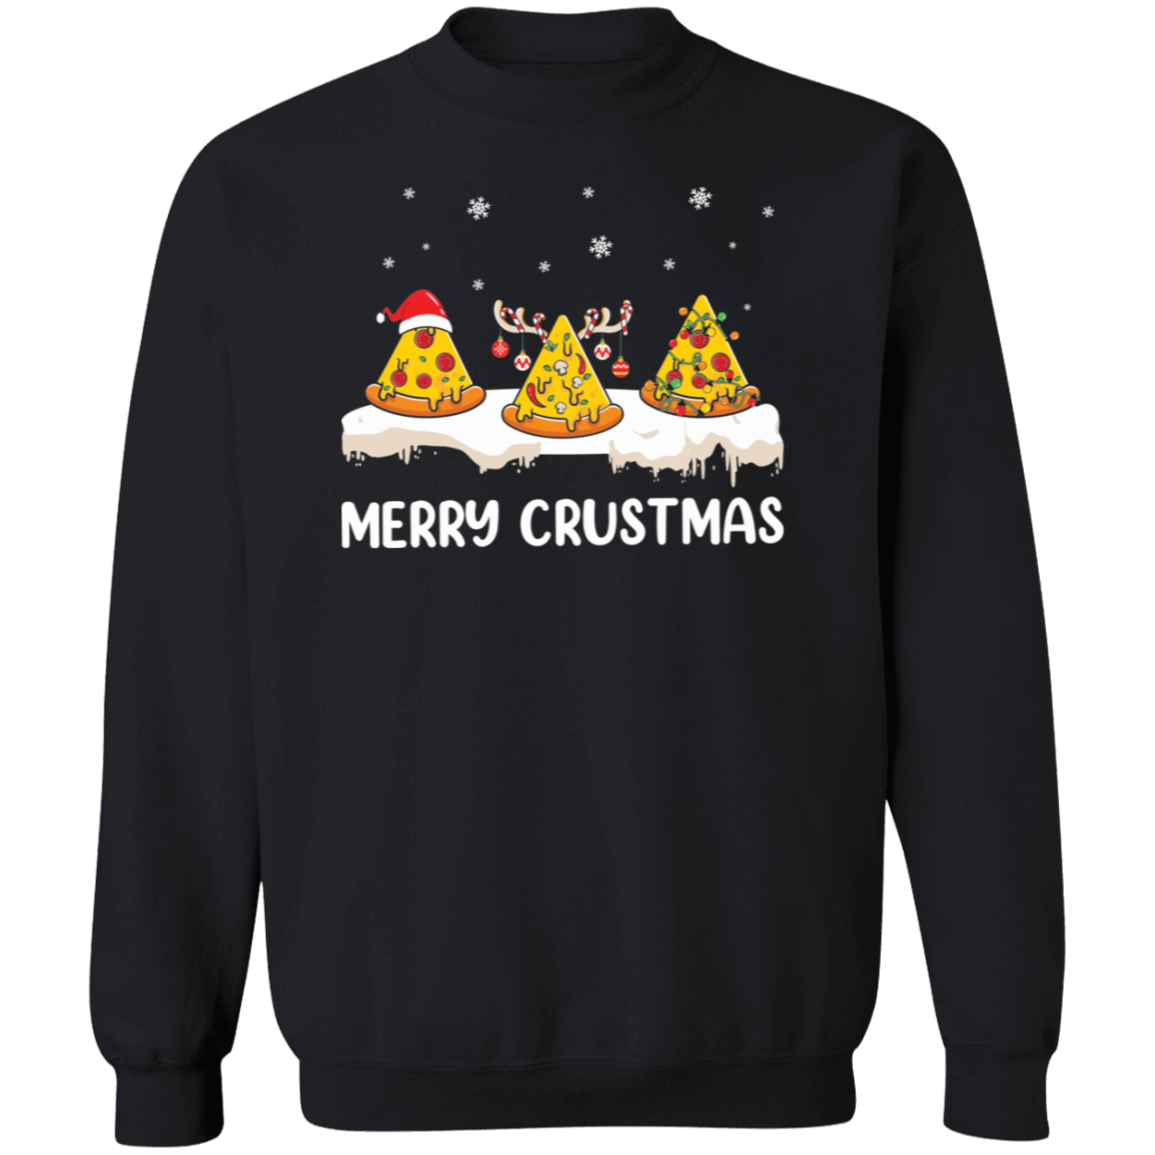 Merry Crustmas, Pizza Lovers Christmas - Unisex Ugly Sweater, Christmas, Winter, Fall